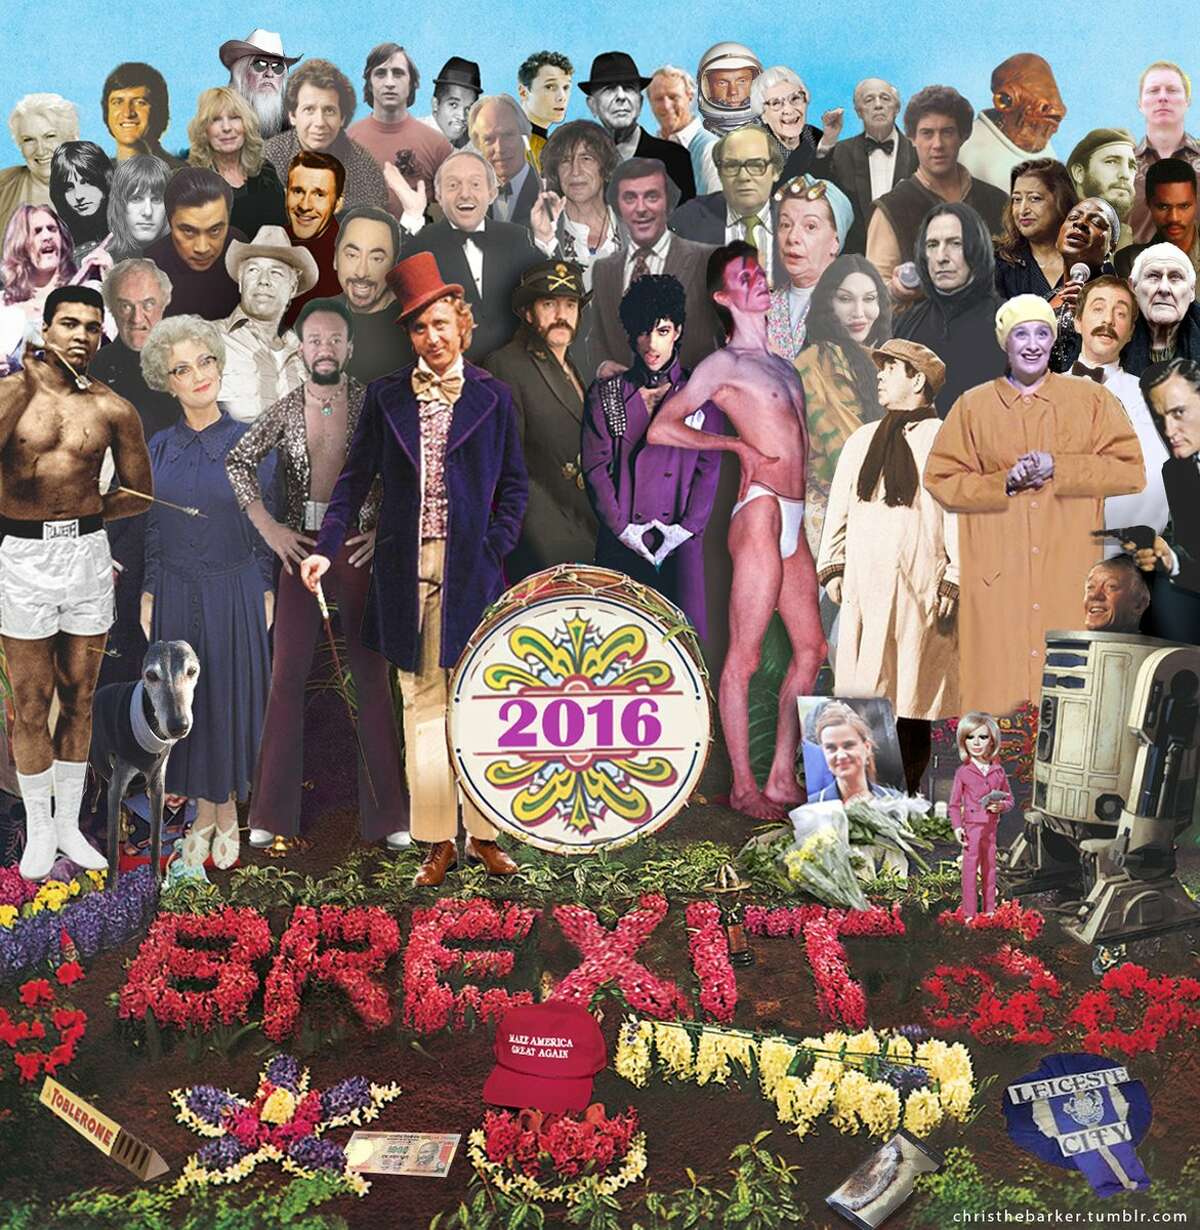 Re-imagining of 'Sgt. Pepper' album cover pays homage to 2016's dead celebs